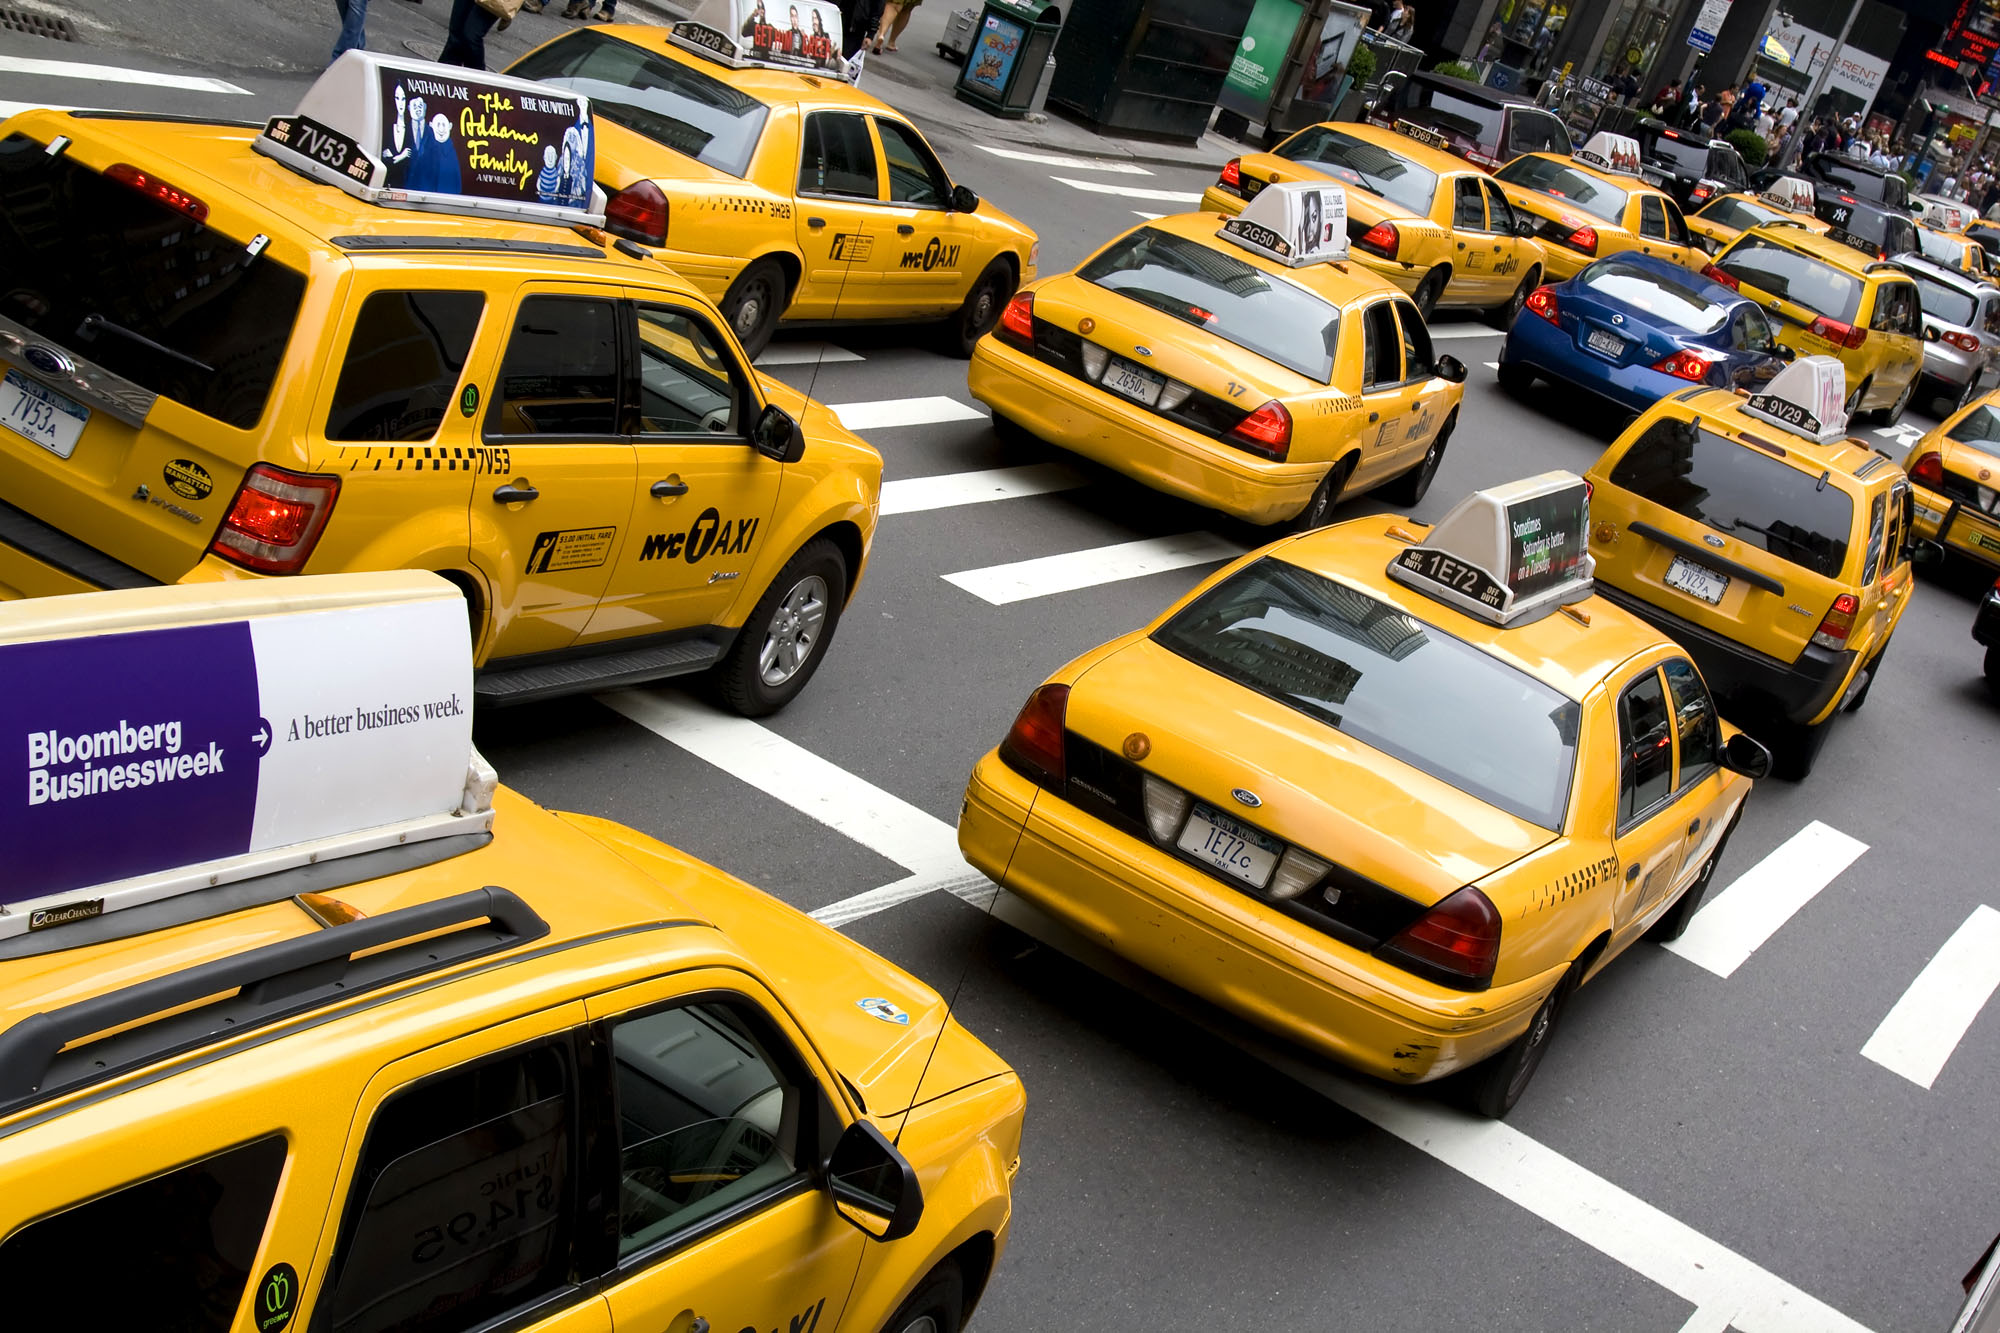 Redemption and a New York Taxi Ride